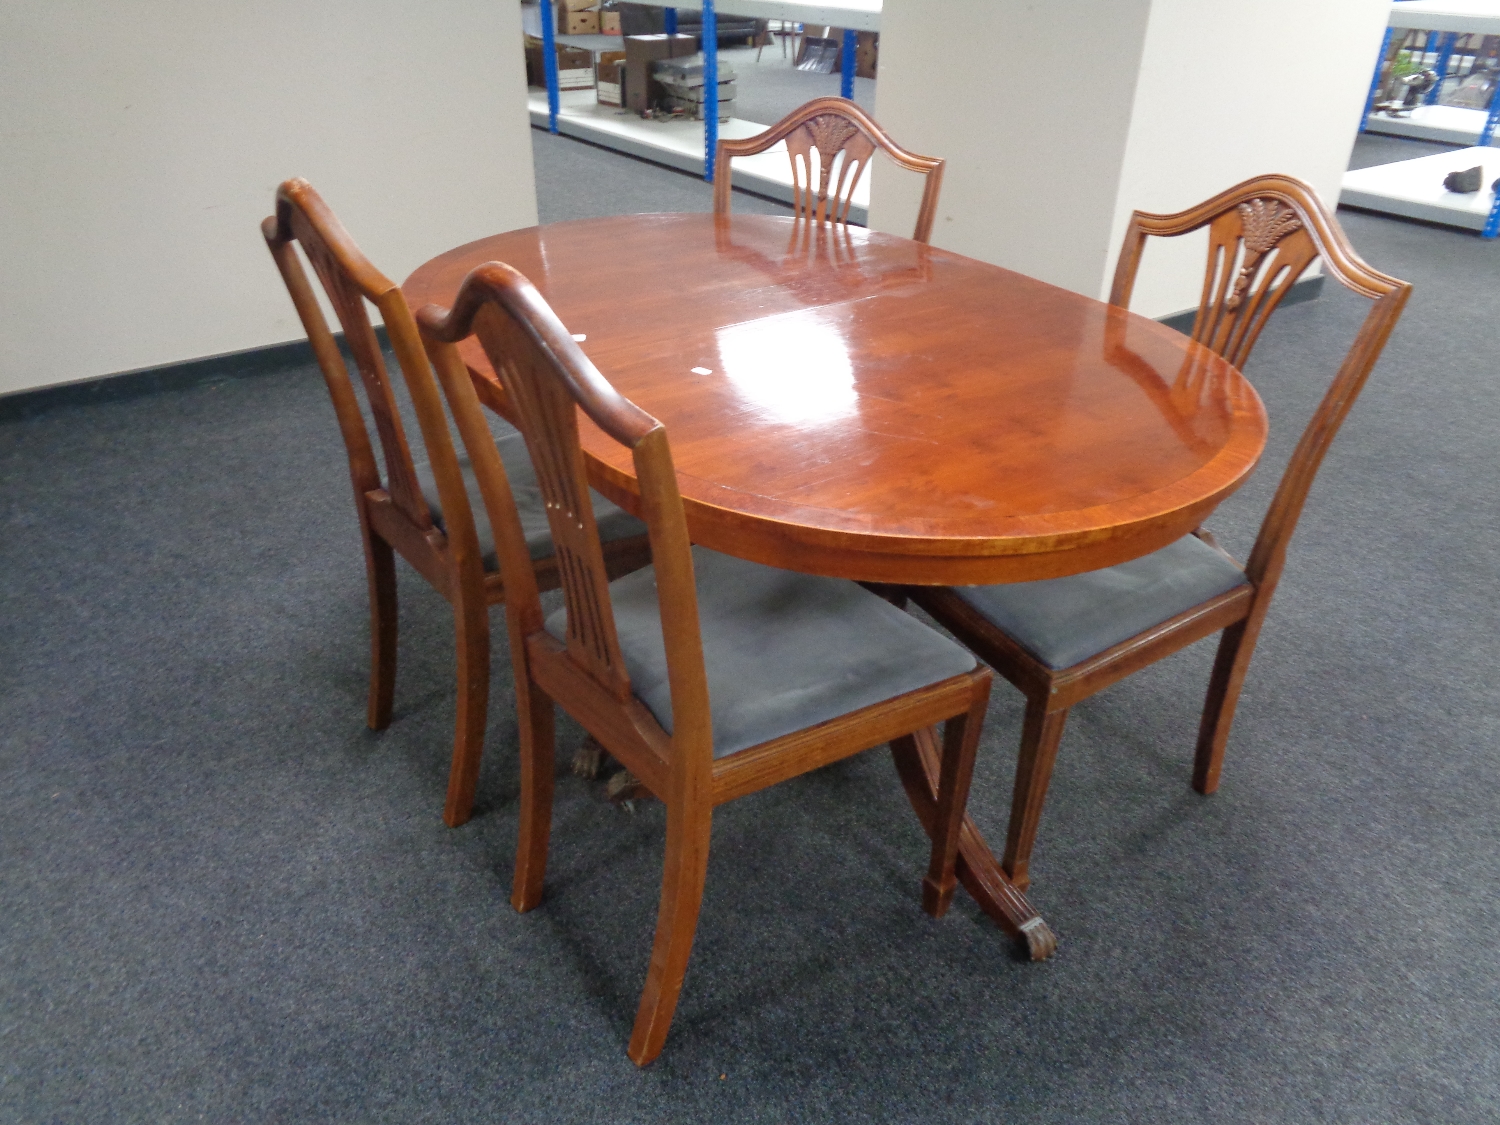 An inlaid yew wood twin pedestal dining table together with a set of four shield back chairs